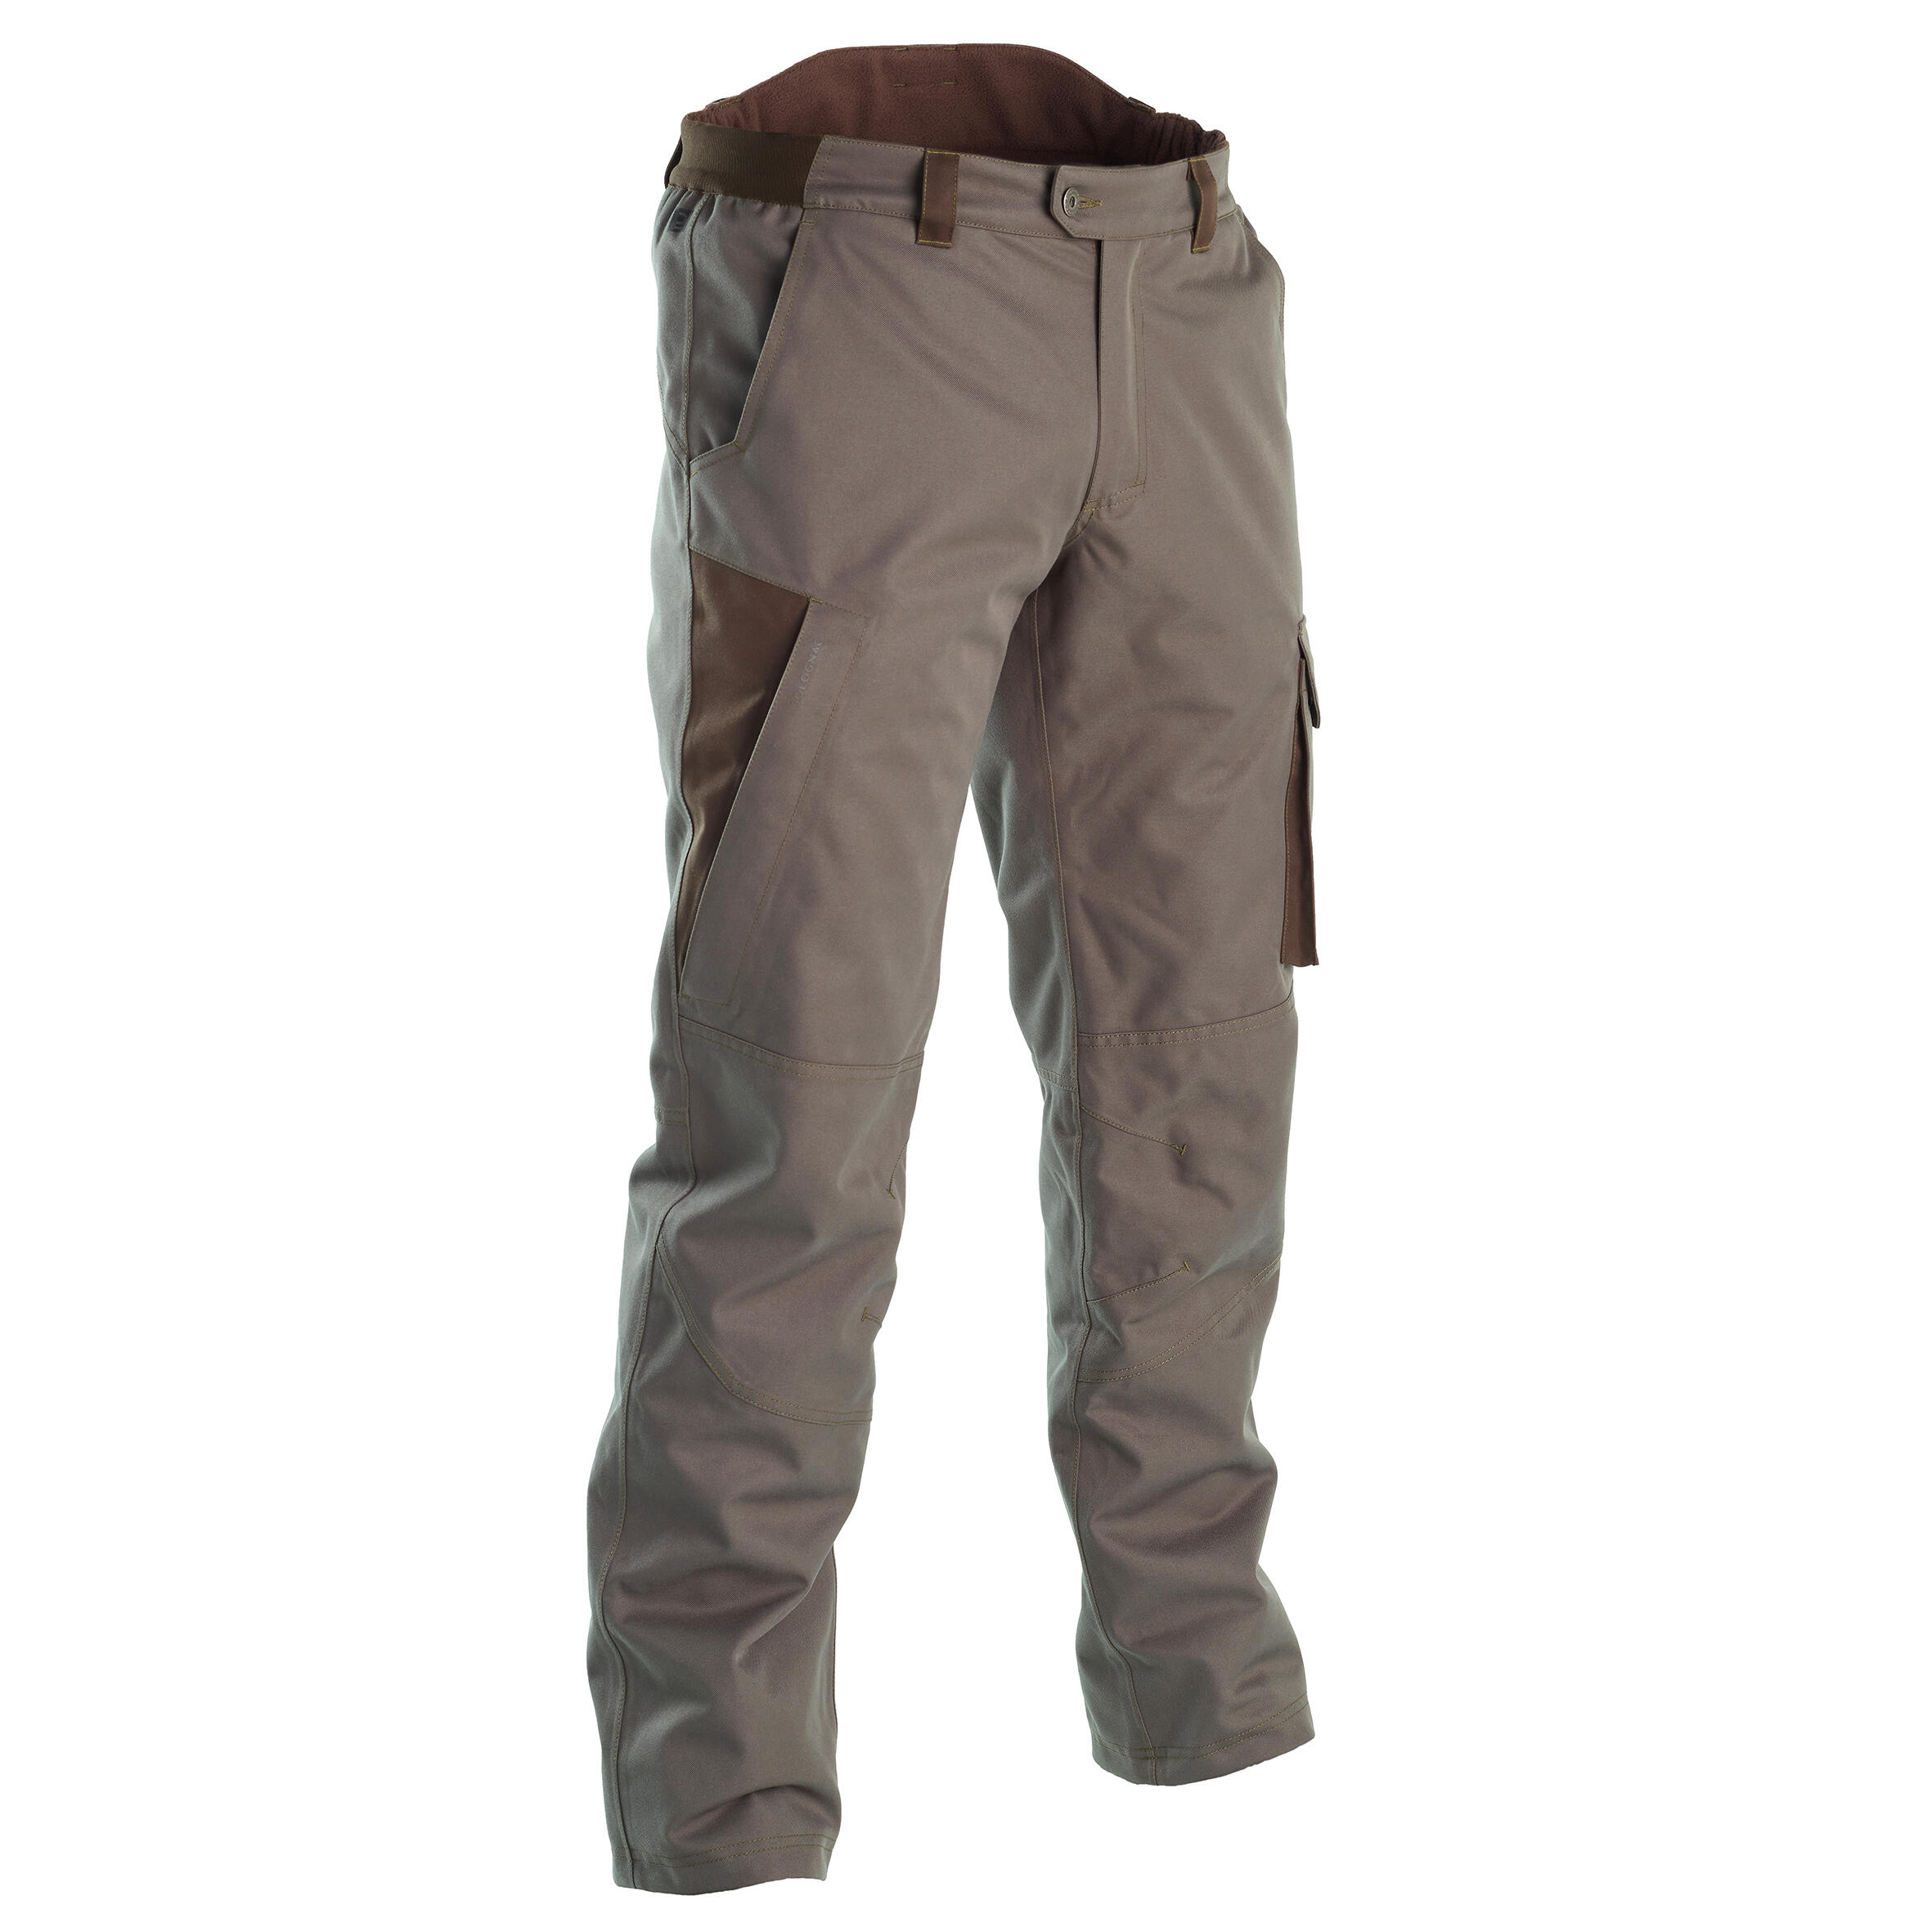 Men's Breathable Trousers Pants 900 Green